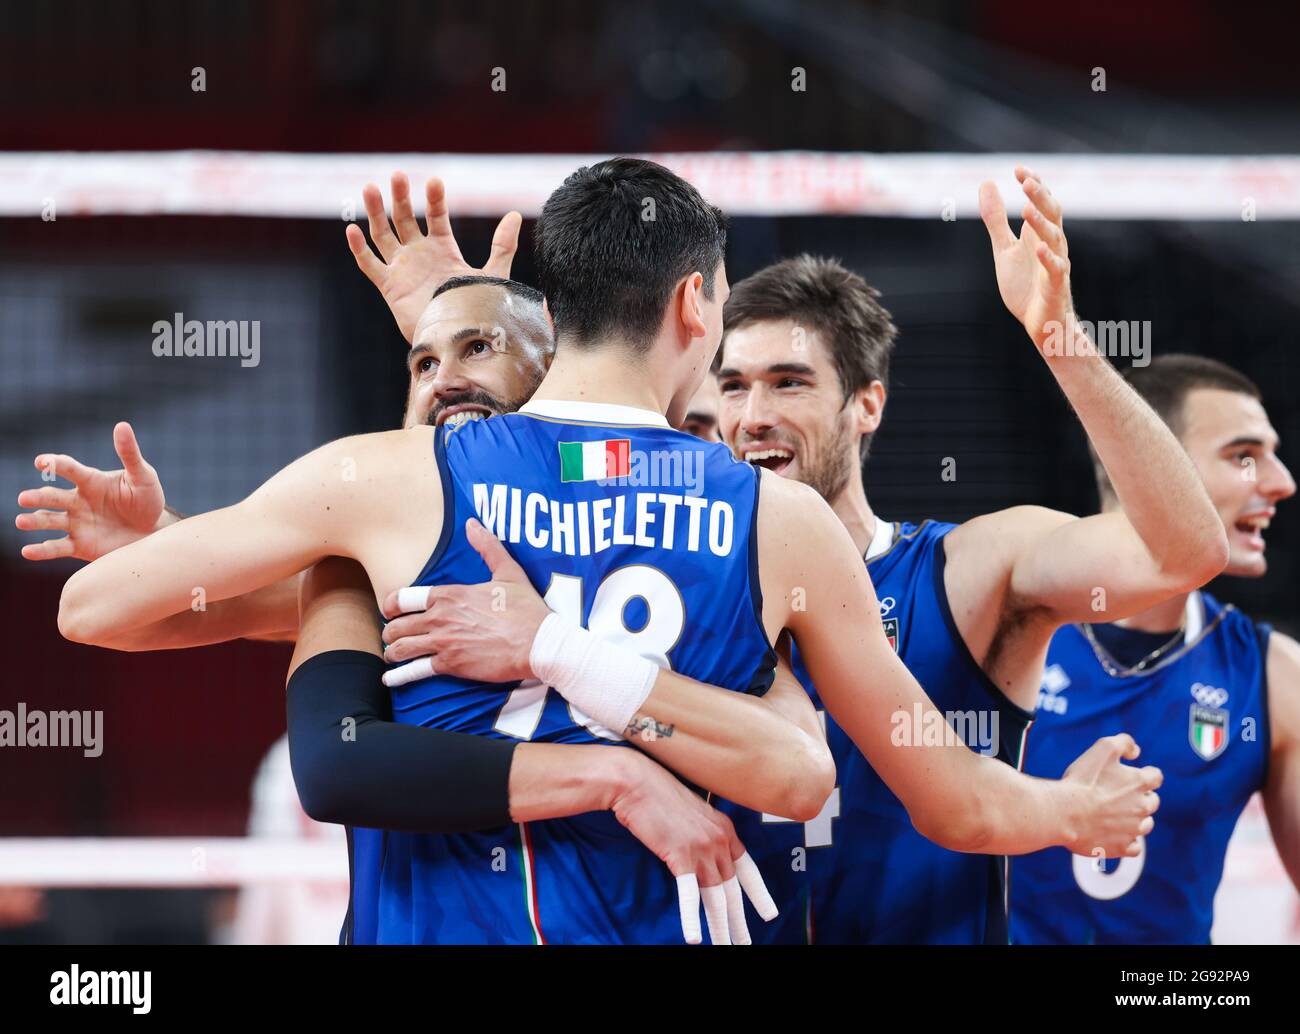 Dongjing. 24th July, 2021. Players of Italy celebrate scoring during the men's volleyball preliminary round match between Italy and Canada at Tokyo 2020 Olympic Games in Tokyo, July 24, 2021. Credit: Ding Ting/Xinhua/Alamy Live News Stock Photo